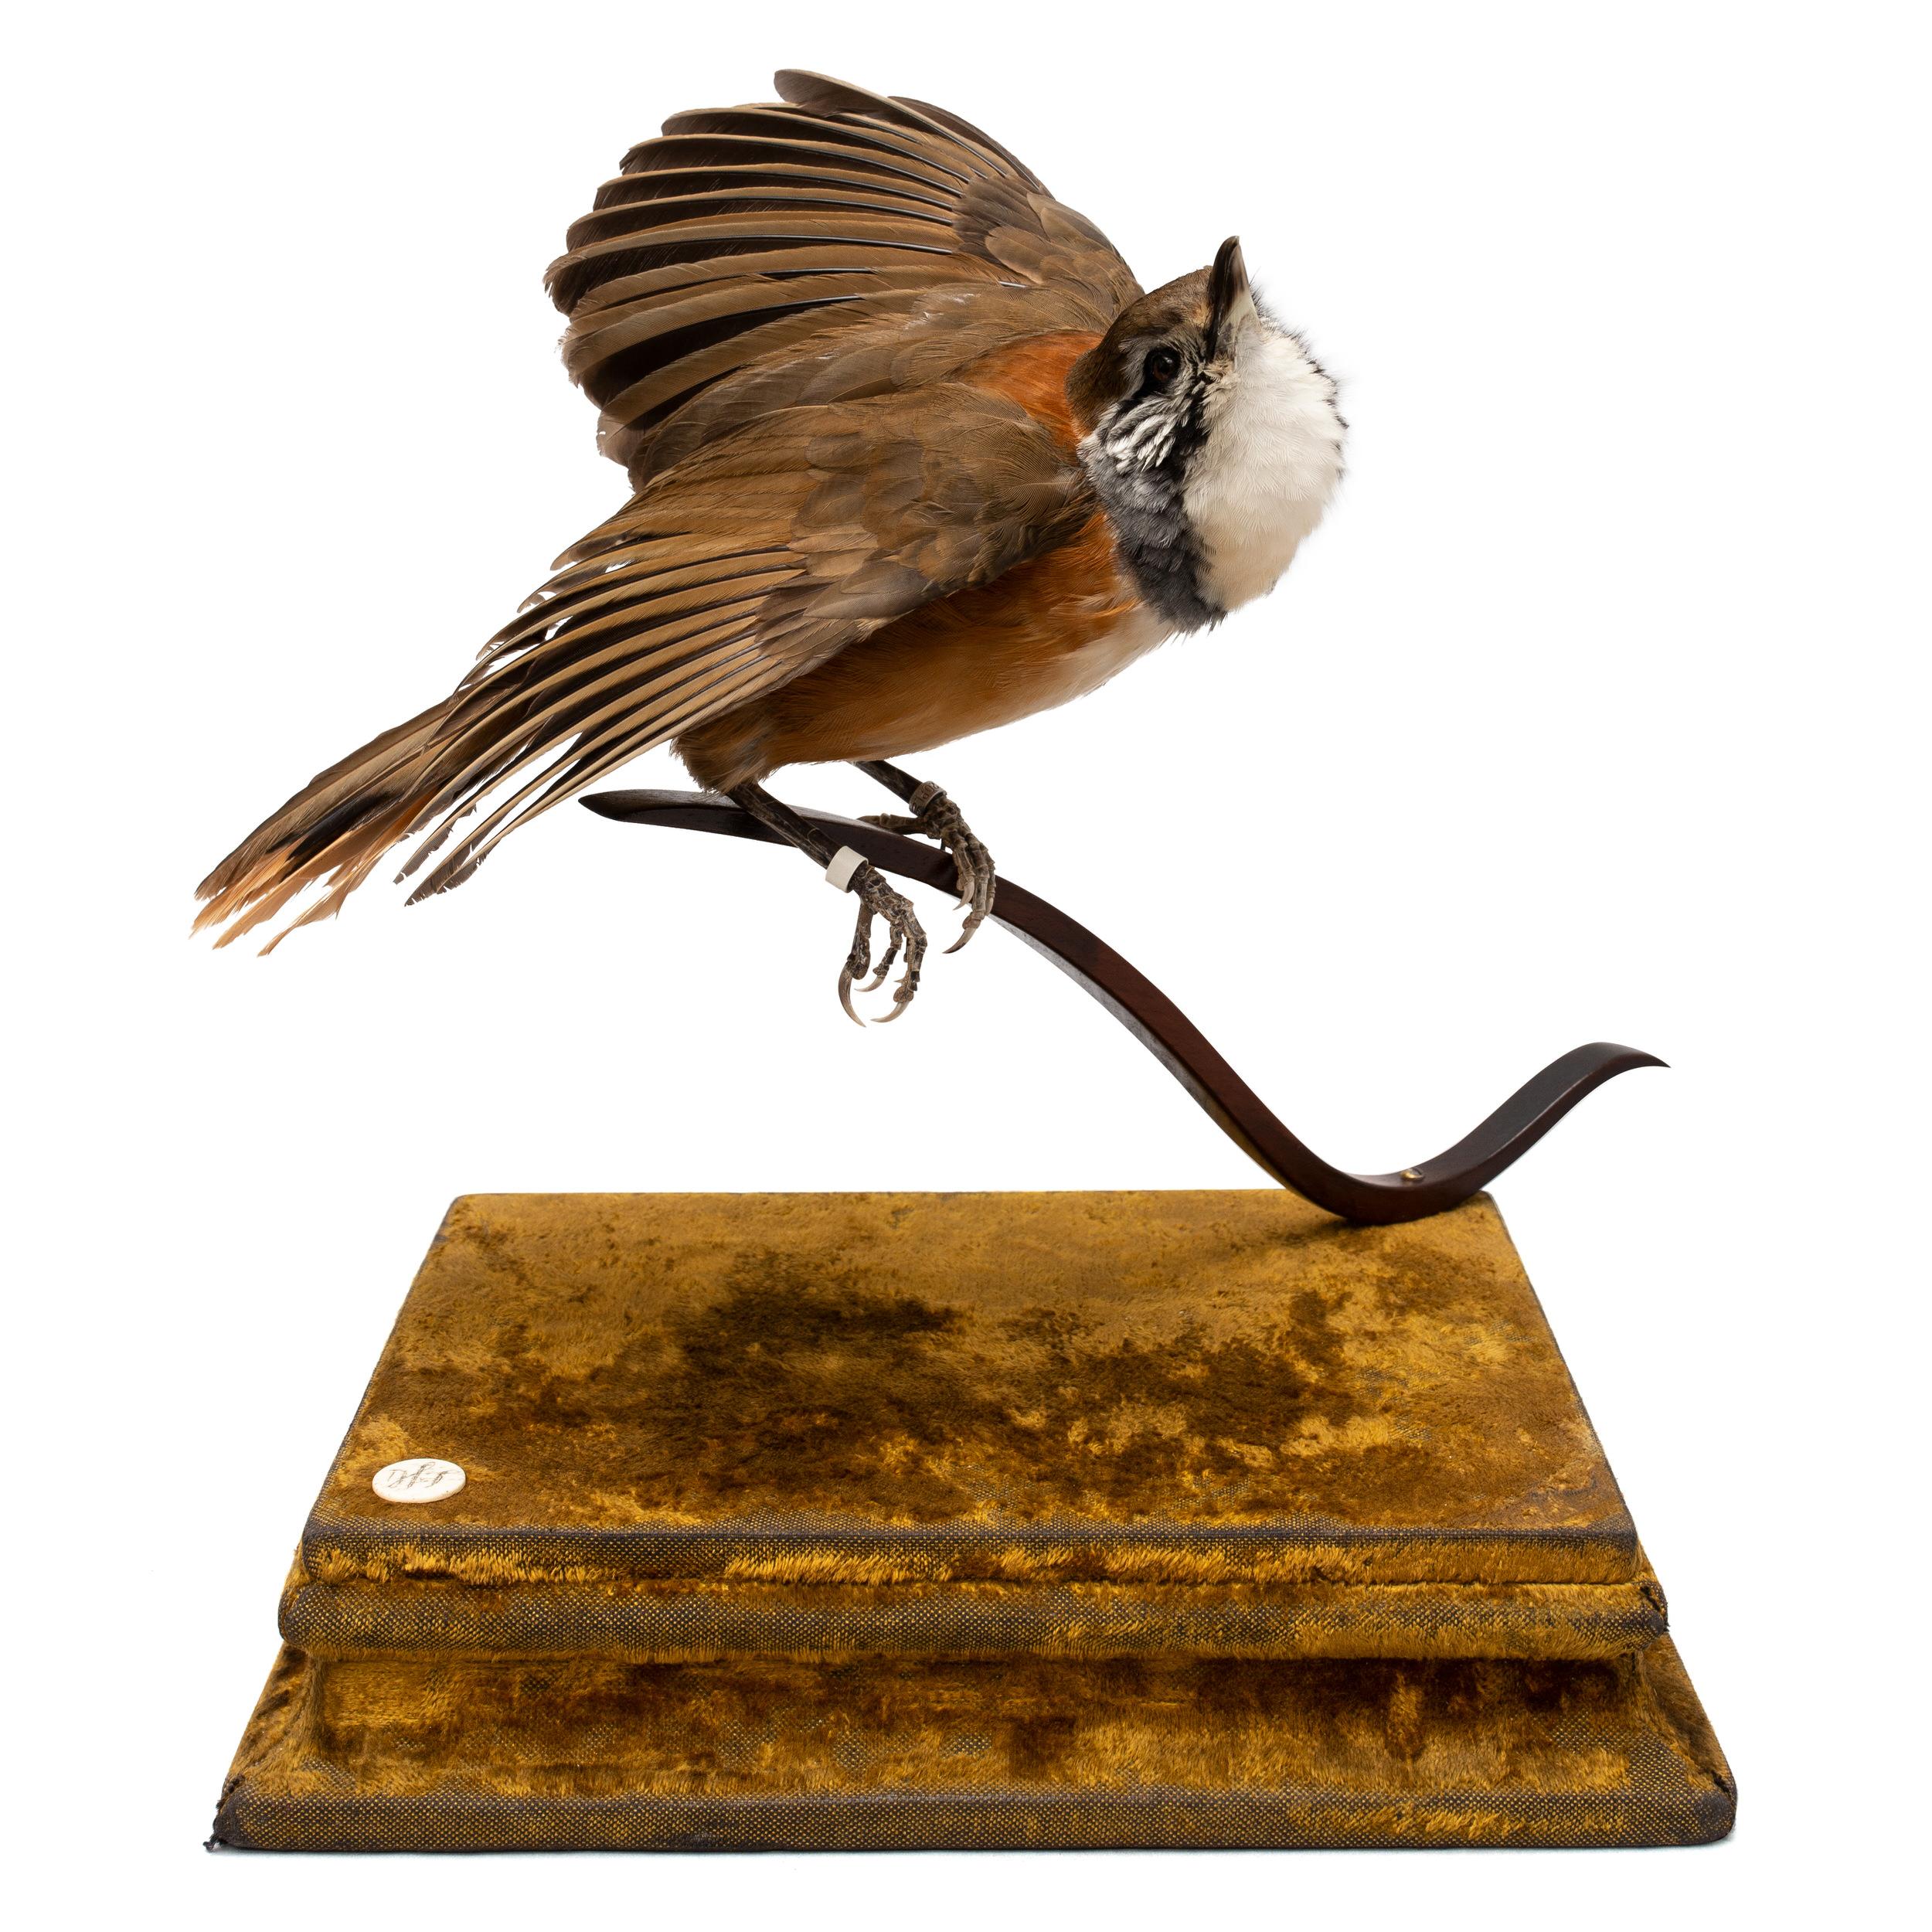 ‘Stills from a Courtship Dance’ is a series of fine taxidermy works with smaller exotic (rare) birds. Sinke and van Tongeren created this series of birds as if they suddenly seemed frozen during the lascivious work put into their mating dance.